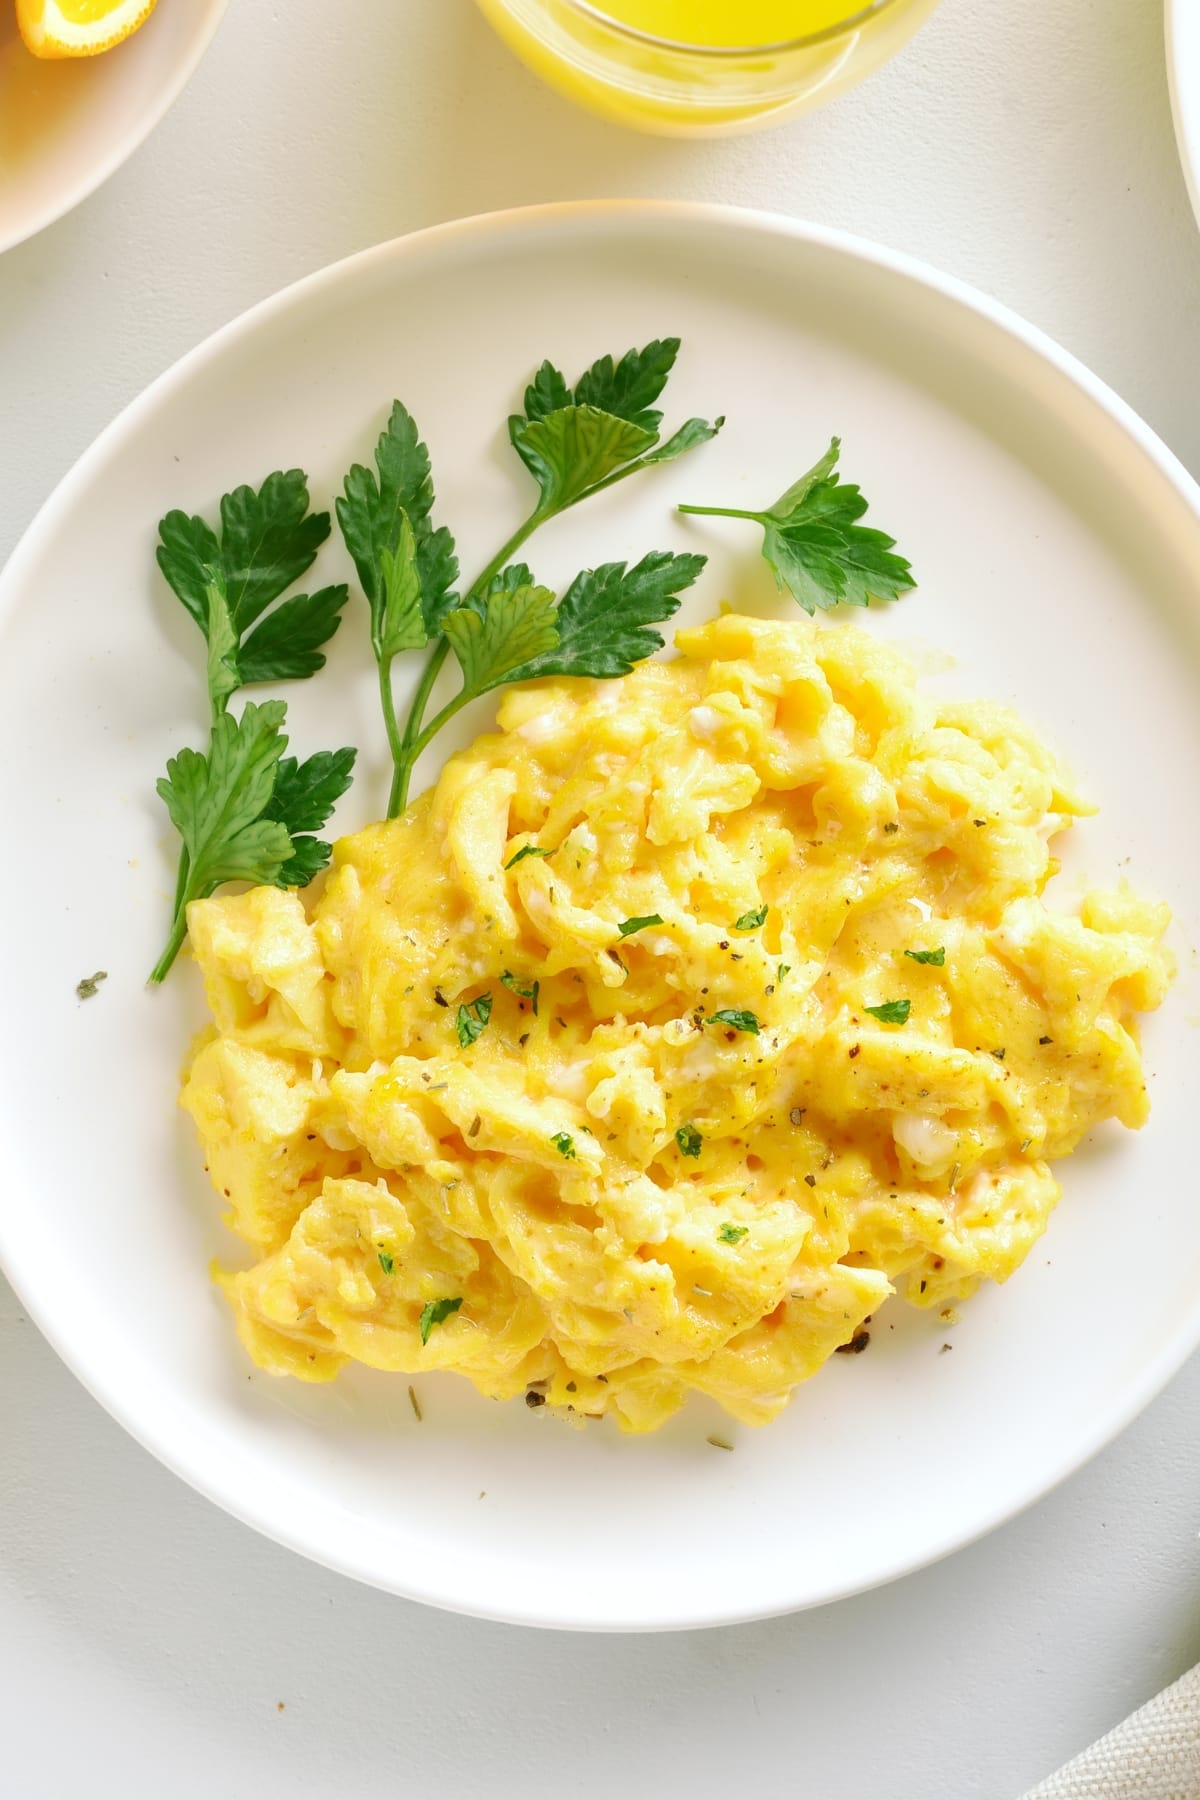 Homemade Microwave Scrambled Eggs in a Plate